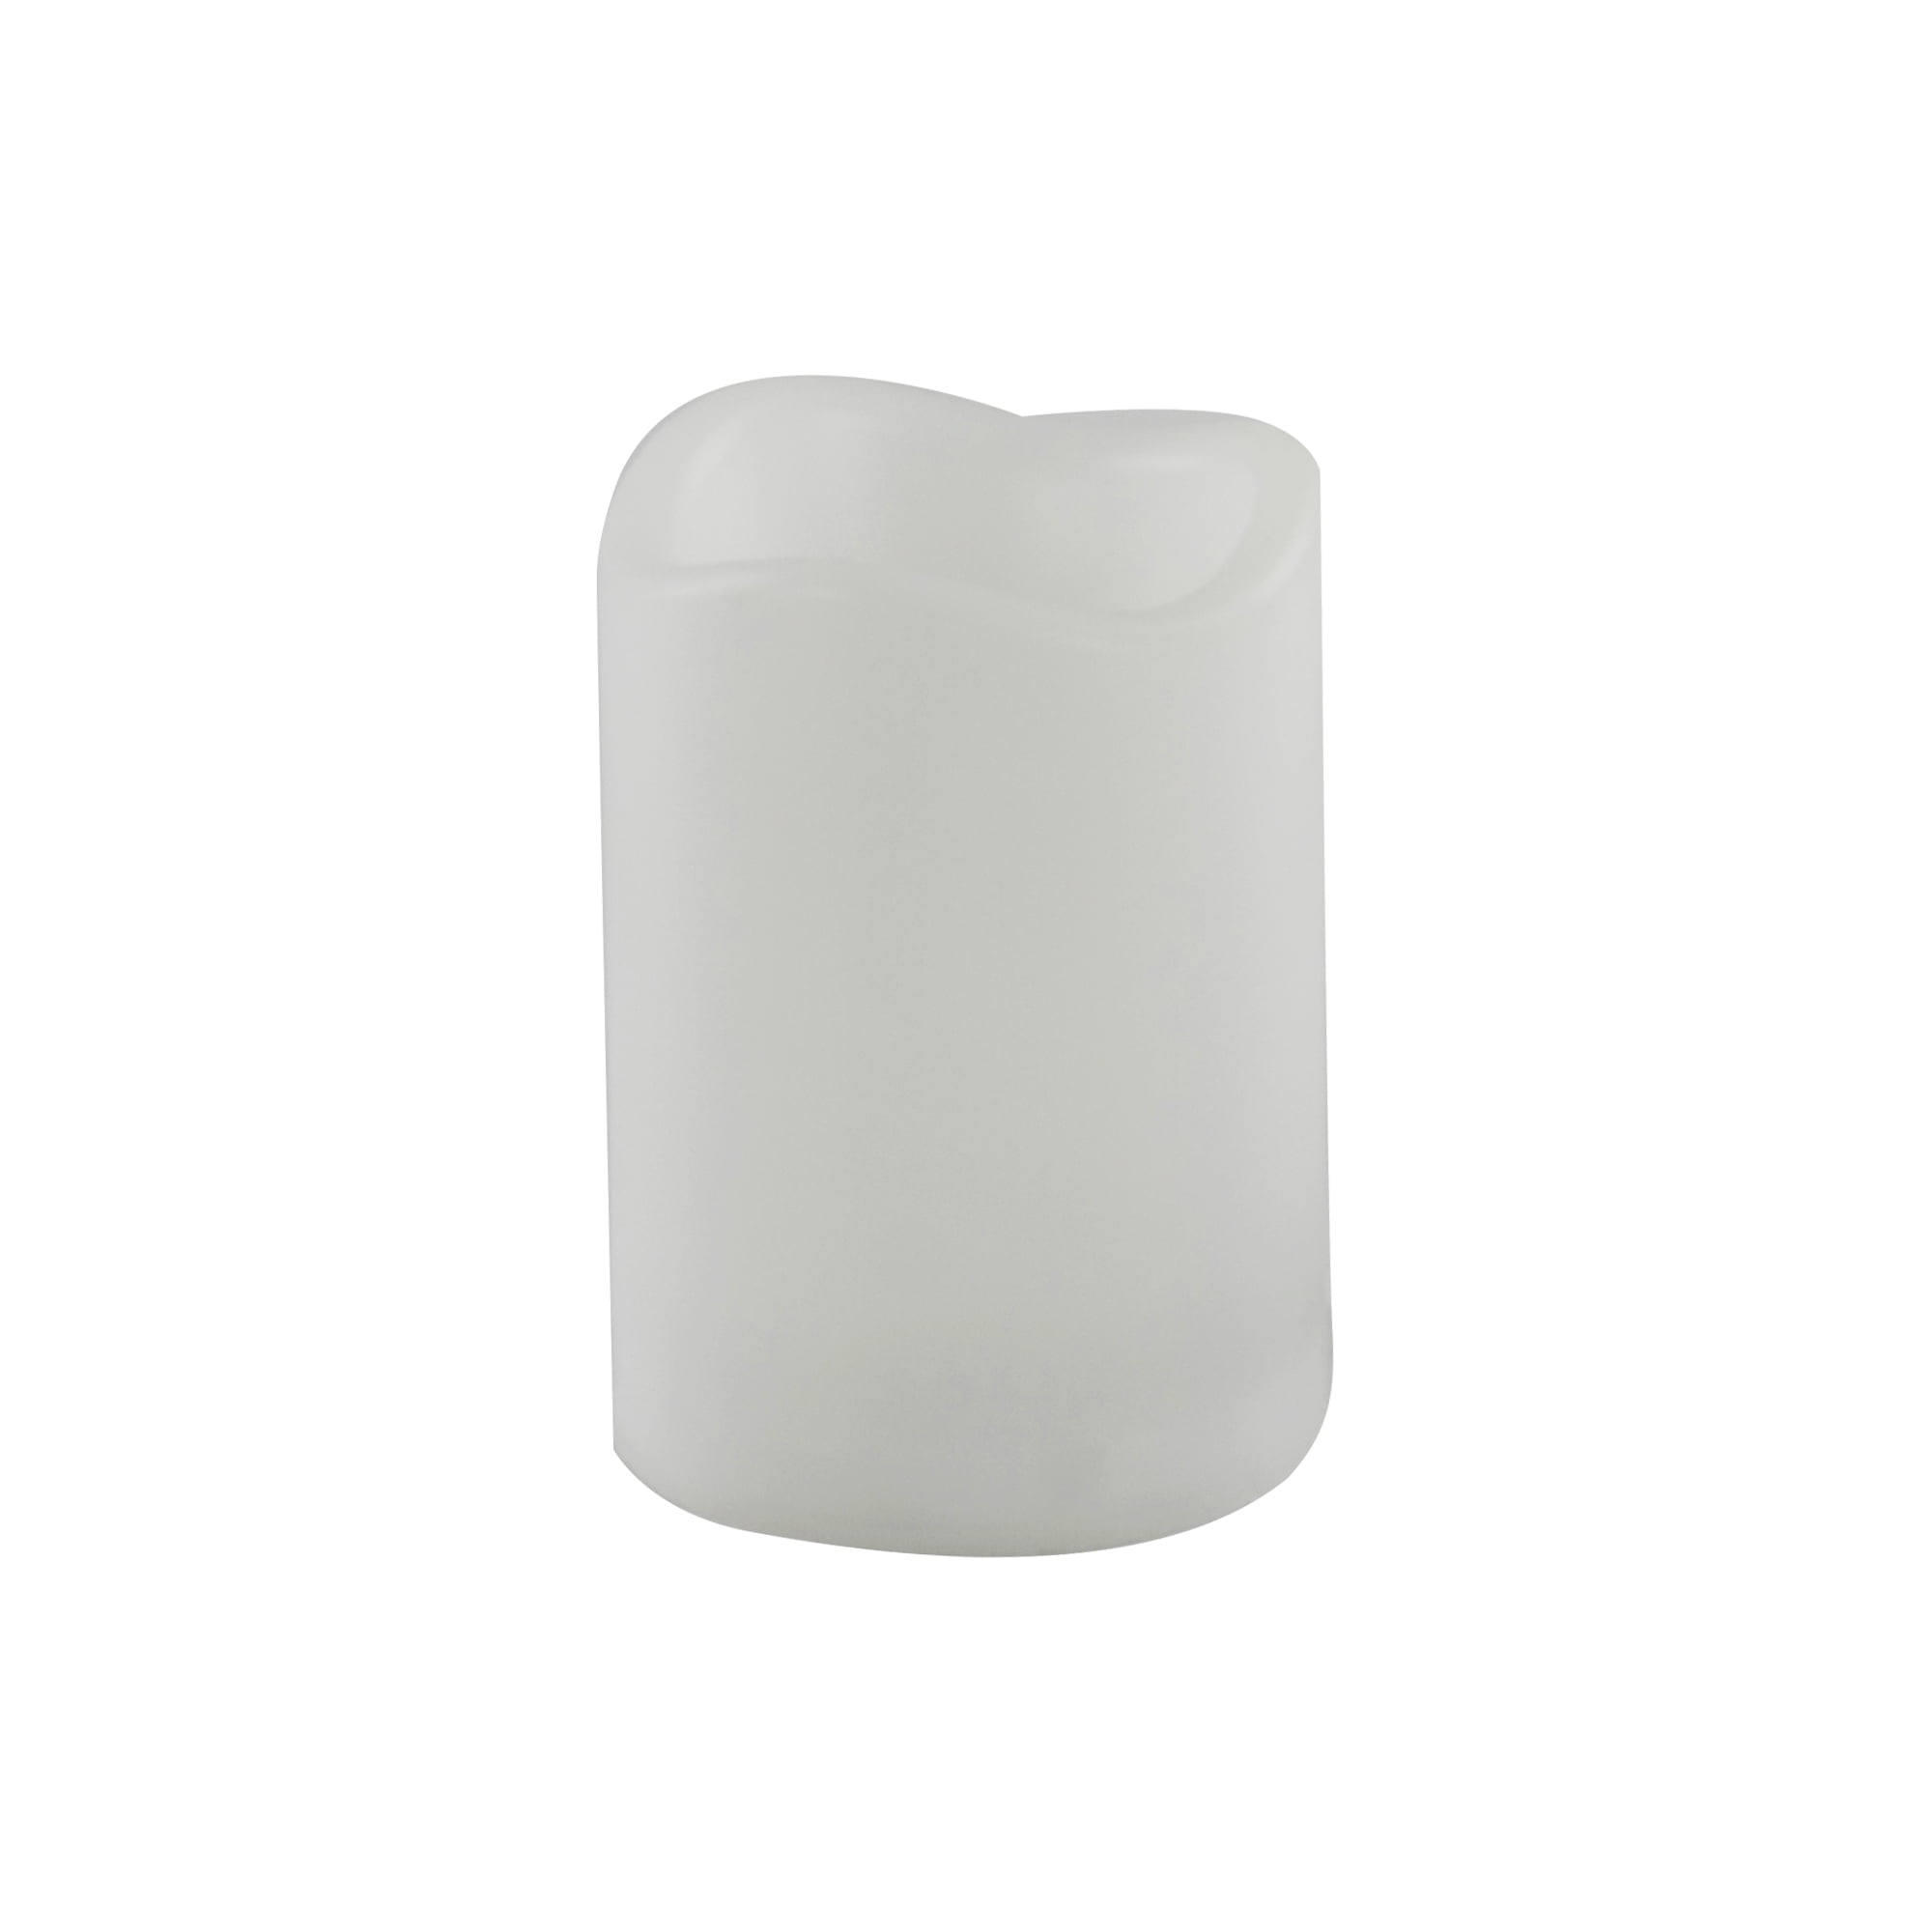 Holiday Time 3x4 inch Plastic Flameless LED Pillar Candle, White, Single Pack